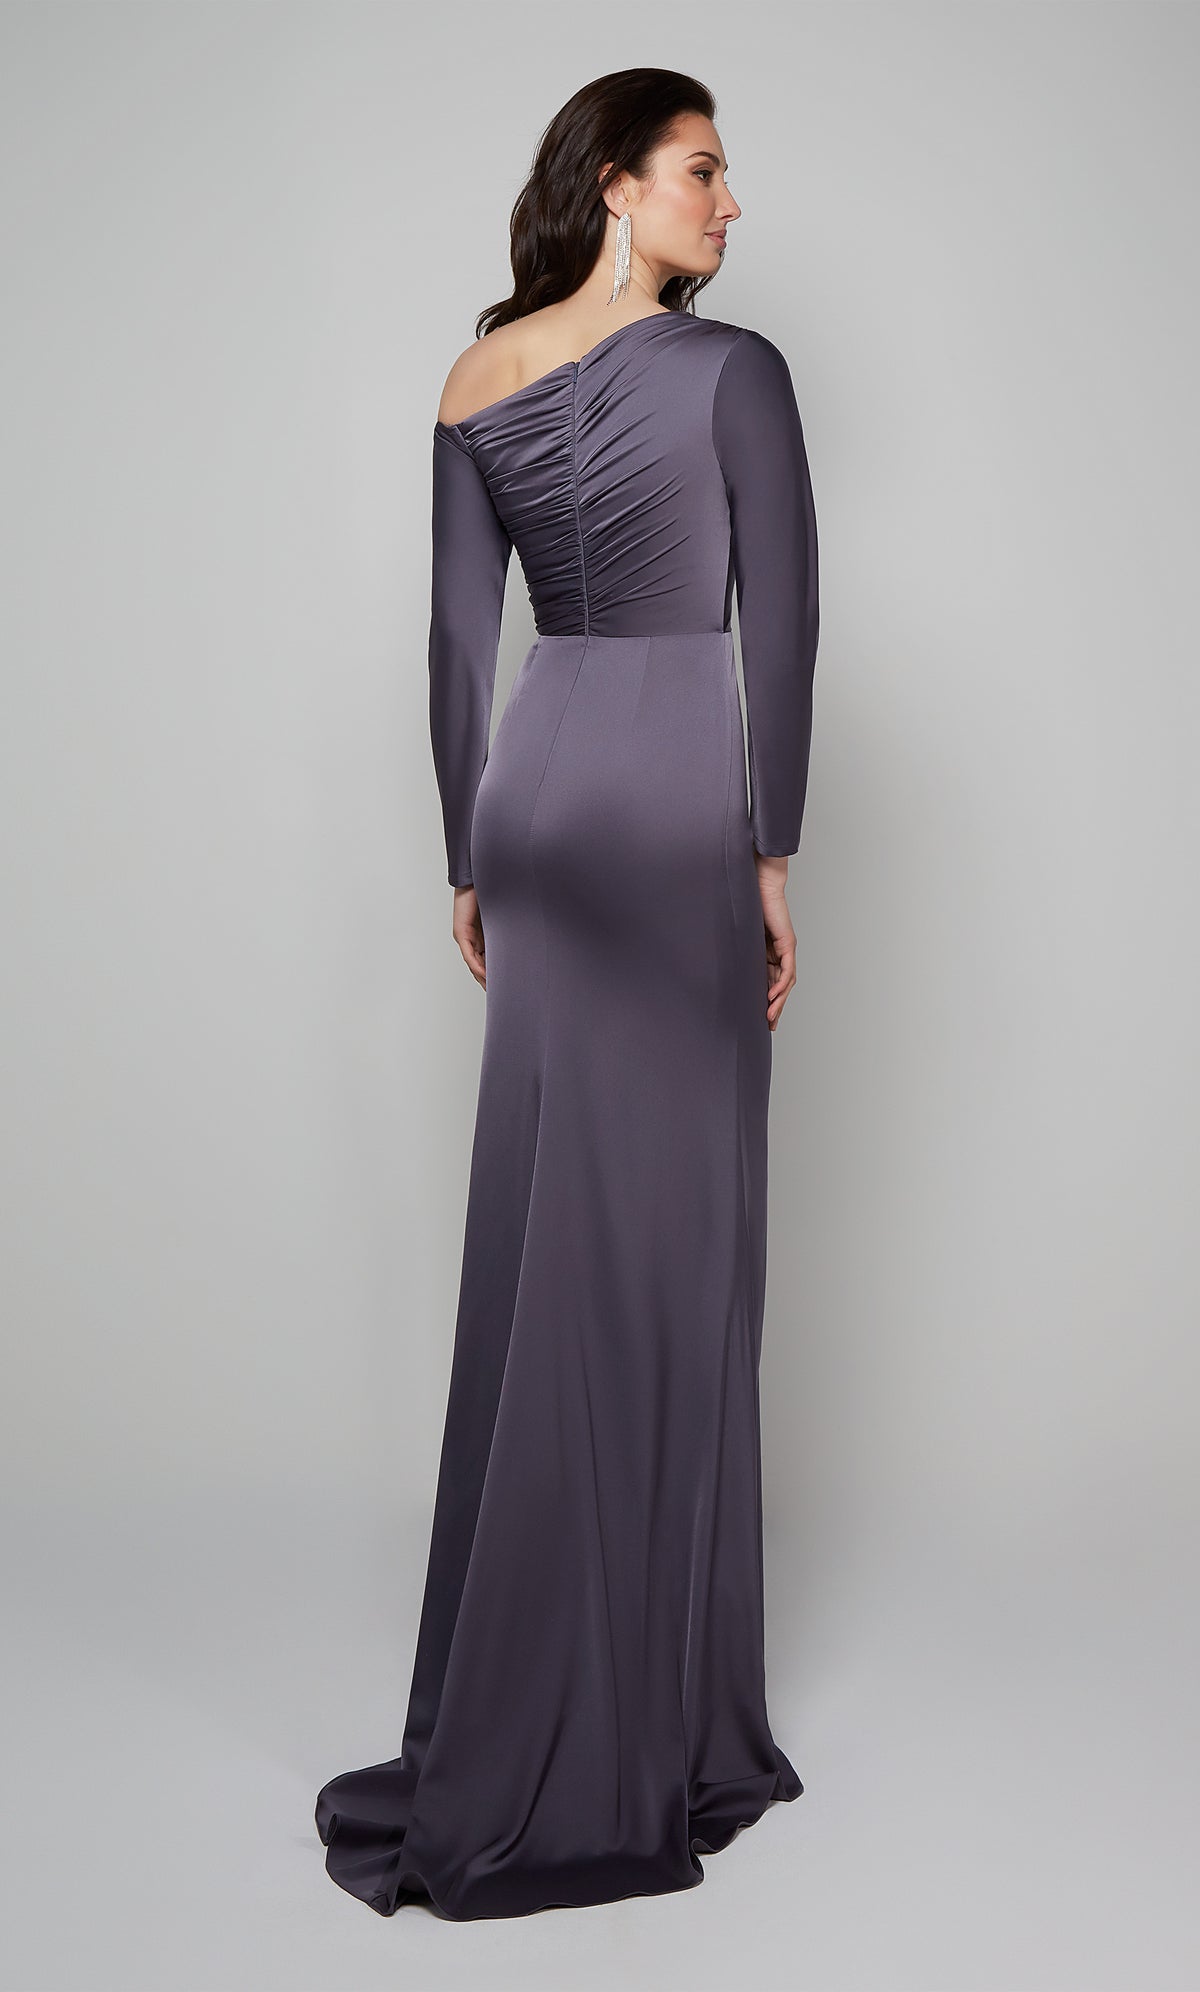 Ruched special occasion dress with a closed back, long sleeves, and a train in graphite.